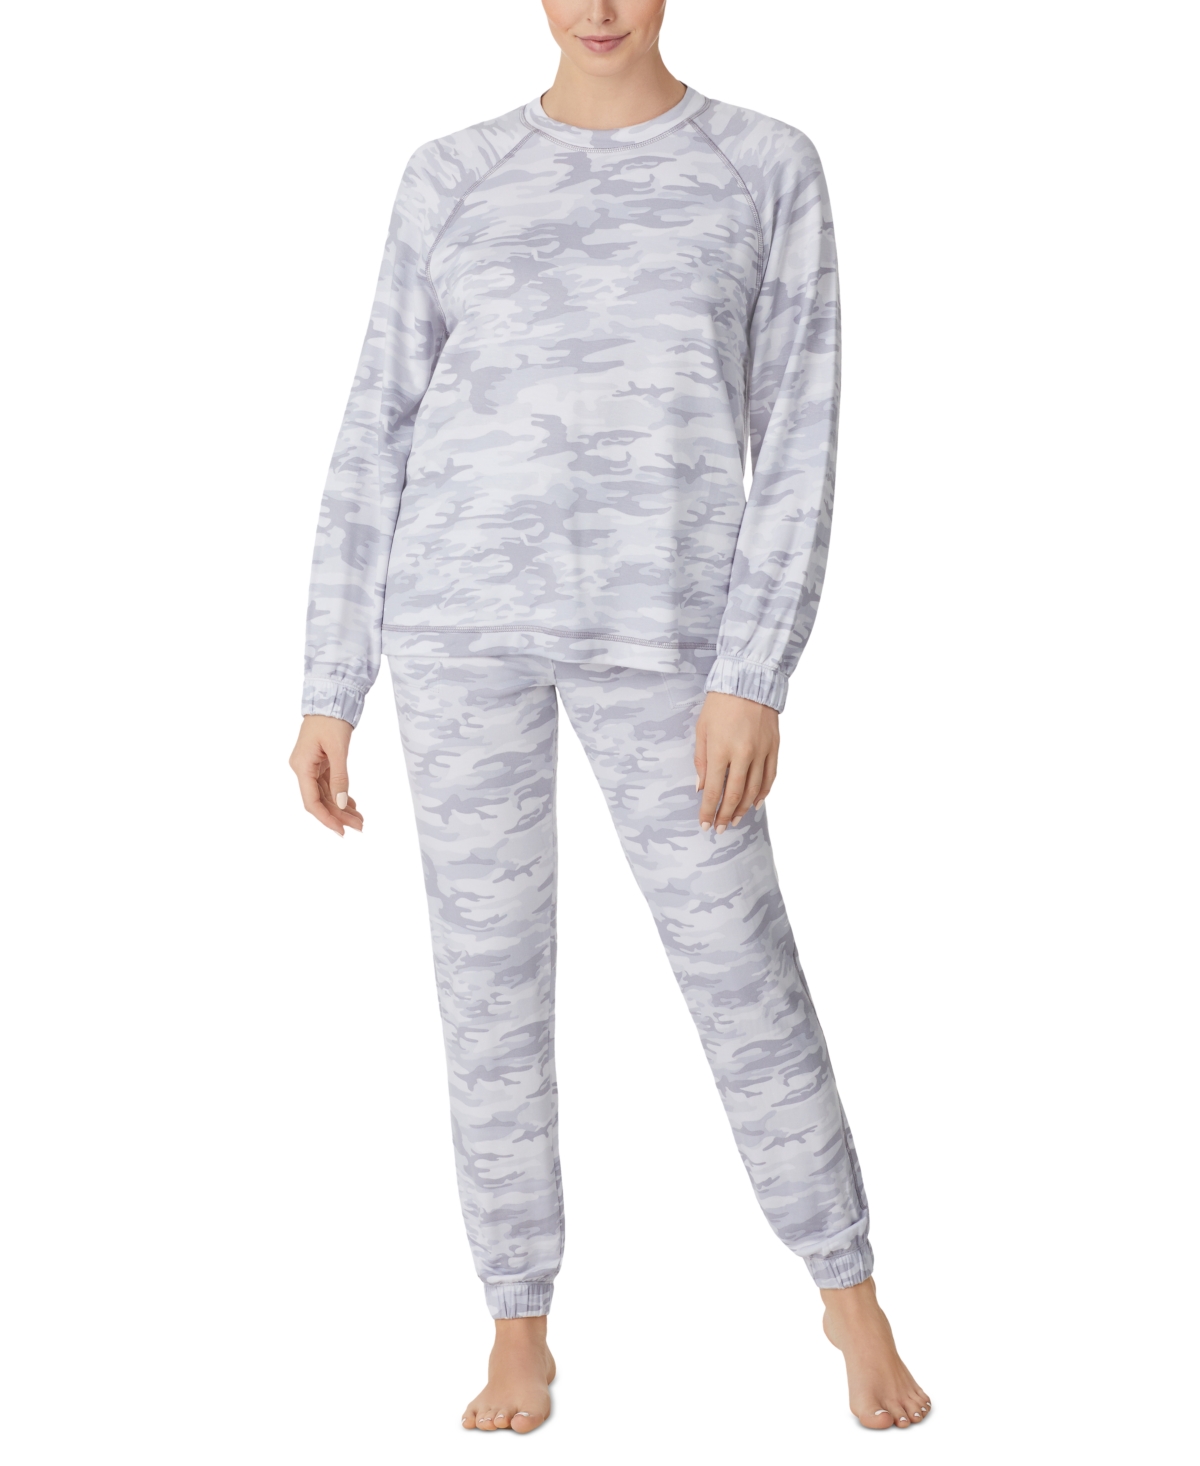 Women's 2-Pc. Brushed French Terry Jogger Pajamas Set - Silver Camo